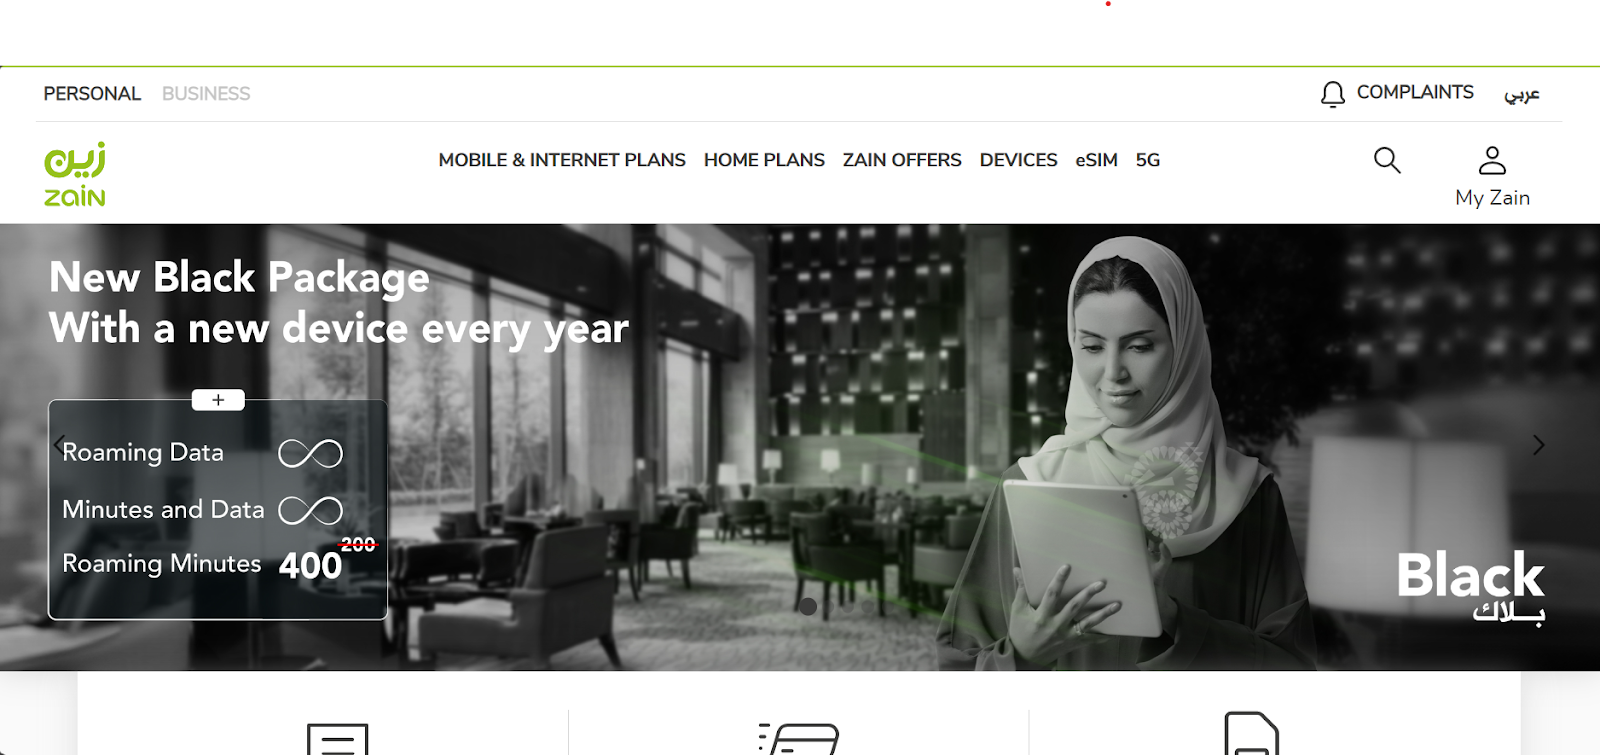 Zain website snapshot highlighting the services it offers.